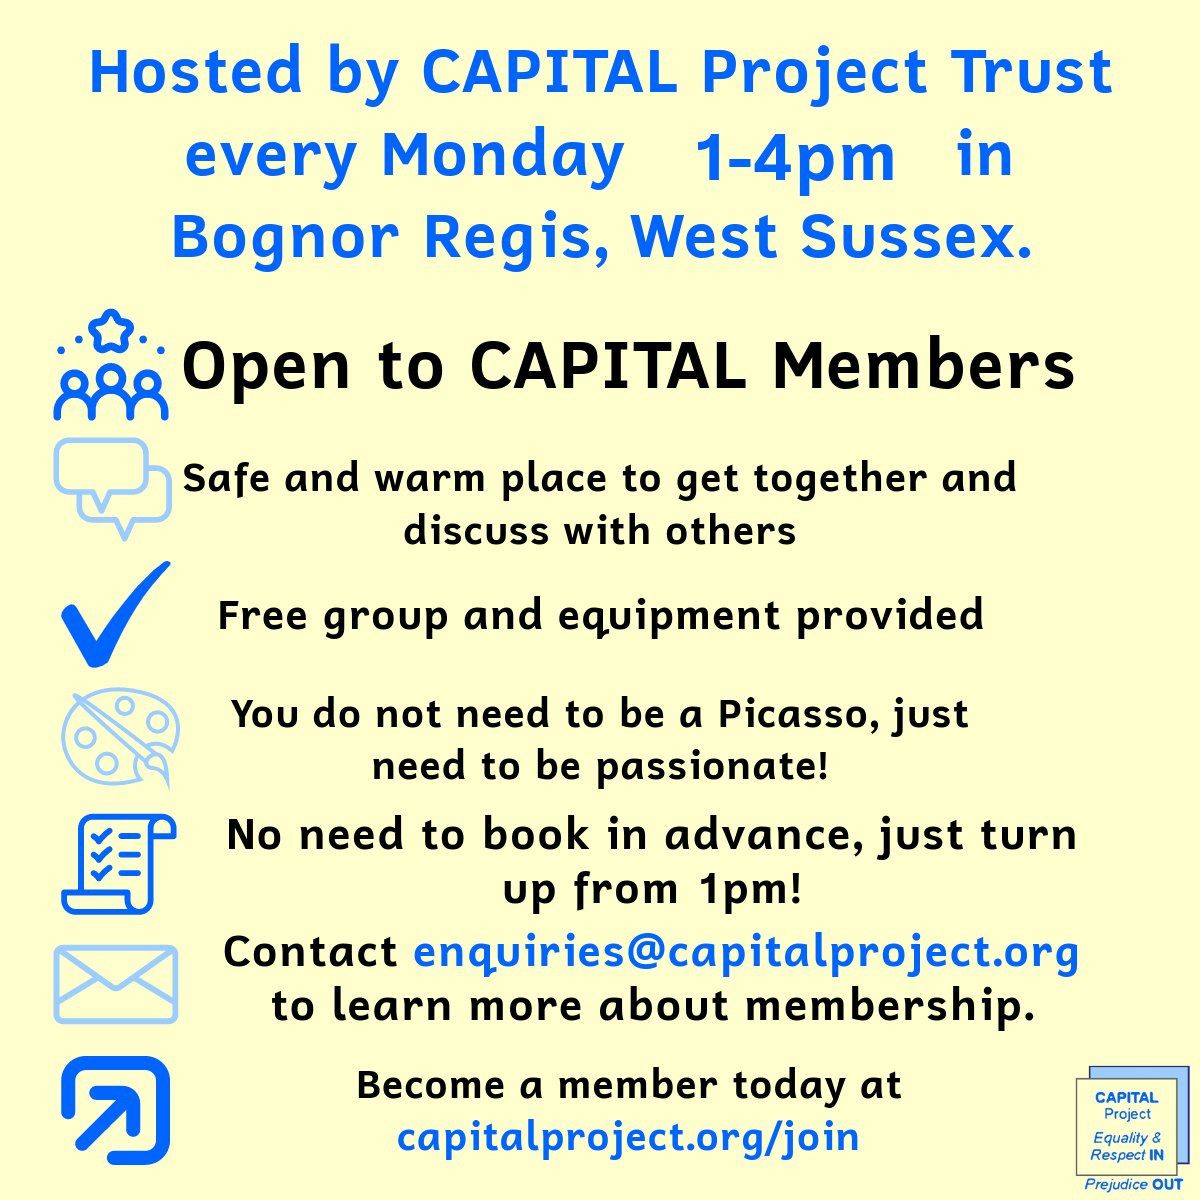 Take part in #CAPITALProjectTrust's weekly #ArtGroup between 1pm-4pm in #Bognor Regis, #WestSussex ✅OPEN to ALL CAPITAL Members 🎨No experience in art needed to take part ✅Equipment and materials provided 🔗Visit capitalproject.org/join to learn about membership